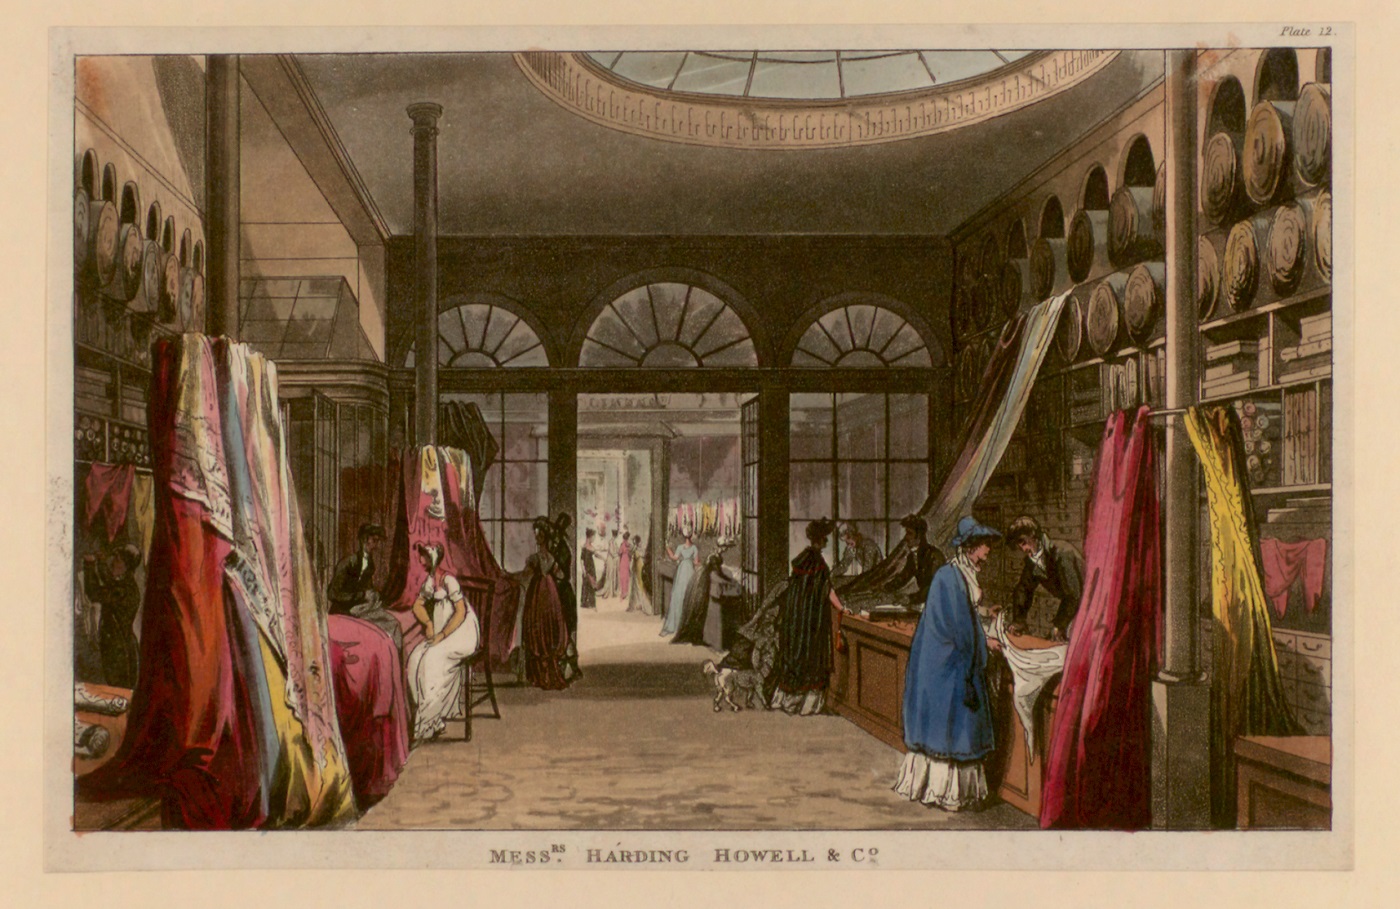 A Drapers' Shop, Messrs Harding, Howell & Co. (London, c. 1810) John Johnson Collection, Trades and Professions 6 (44), Bodleian Libraries